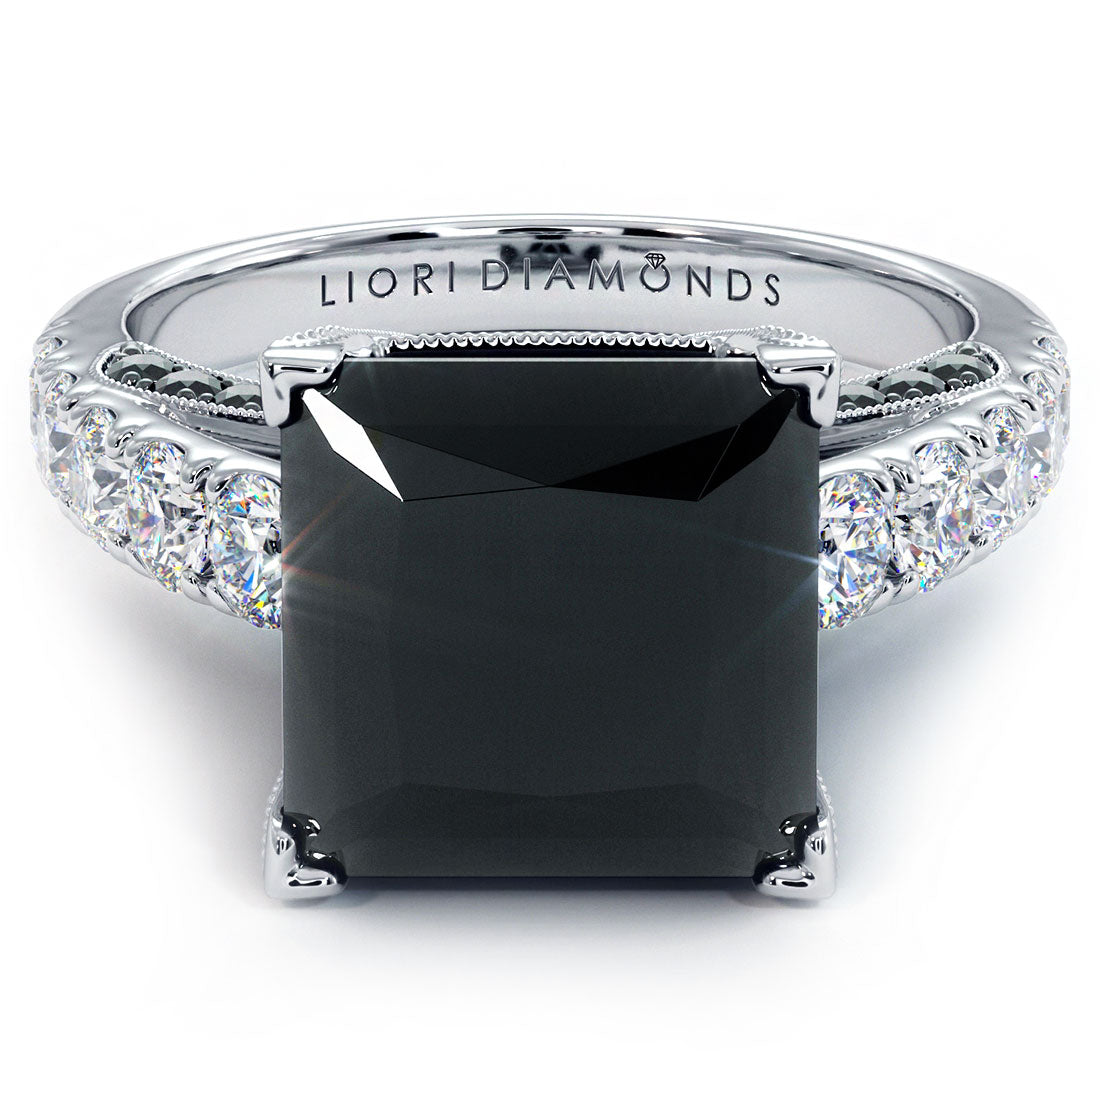 LOVE! Black diamond engagement rings are the latest wedding trend |  SHEmazing!